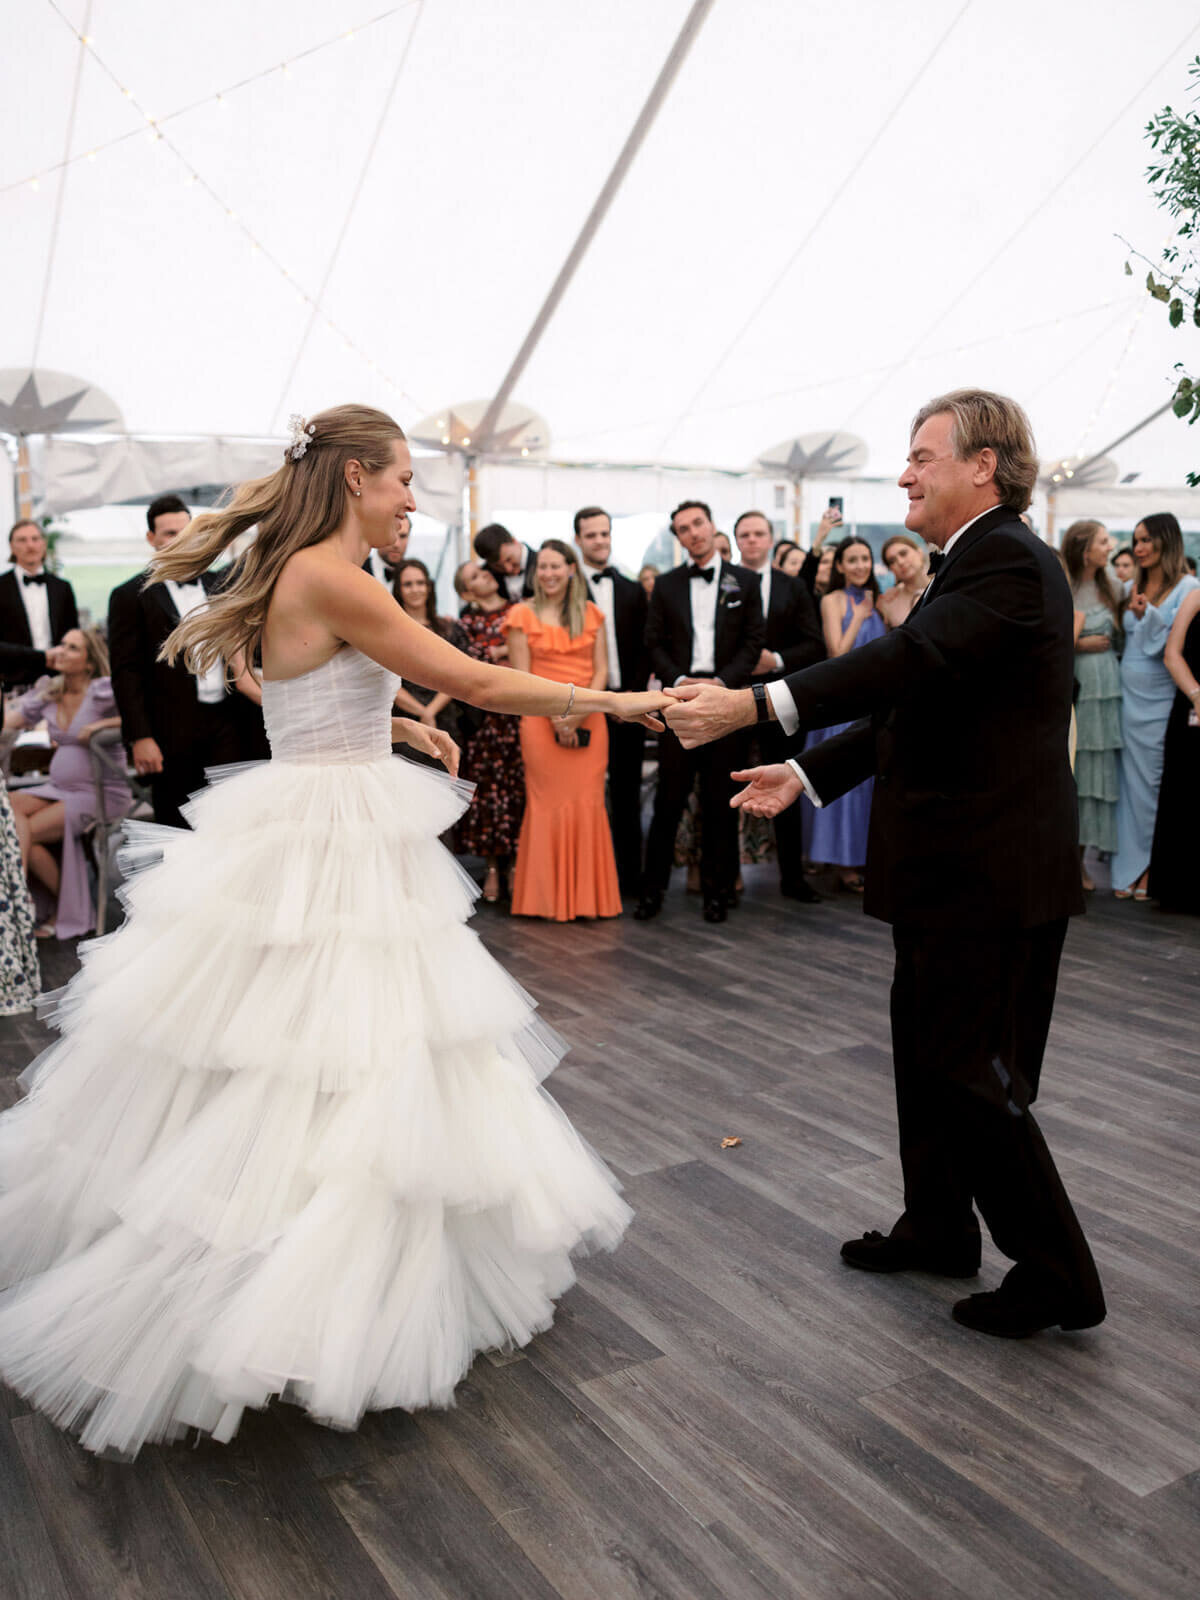 The bride is happily dancing with her father at the venue as guests cheer at The Ausable Club, NY. Image by Jenny Fu Studio